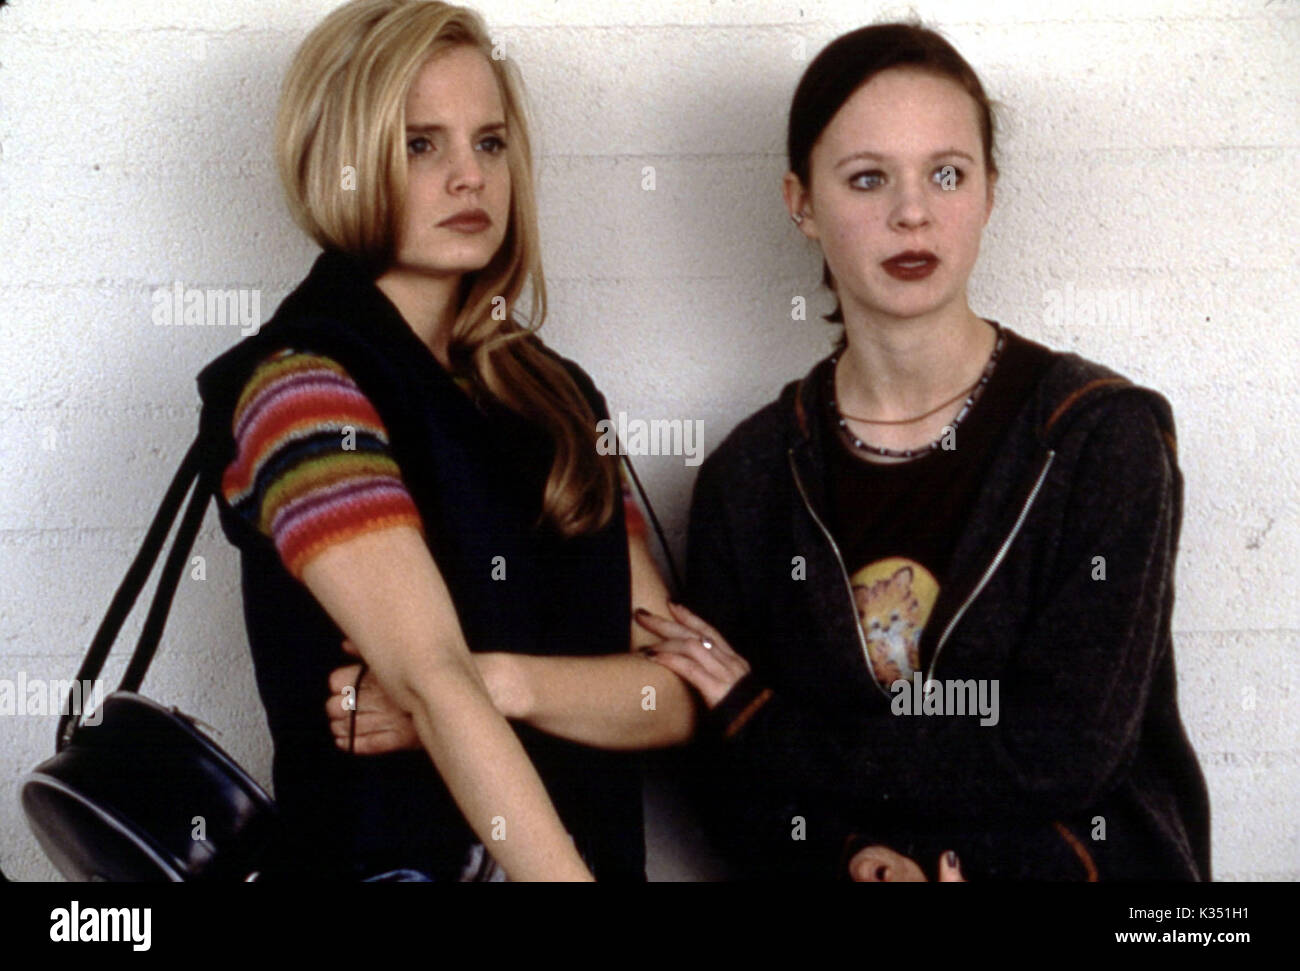 How Old was Thora Birch in American Beauty 